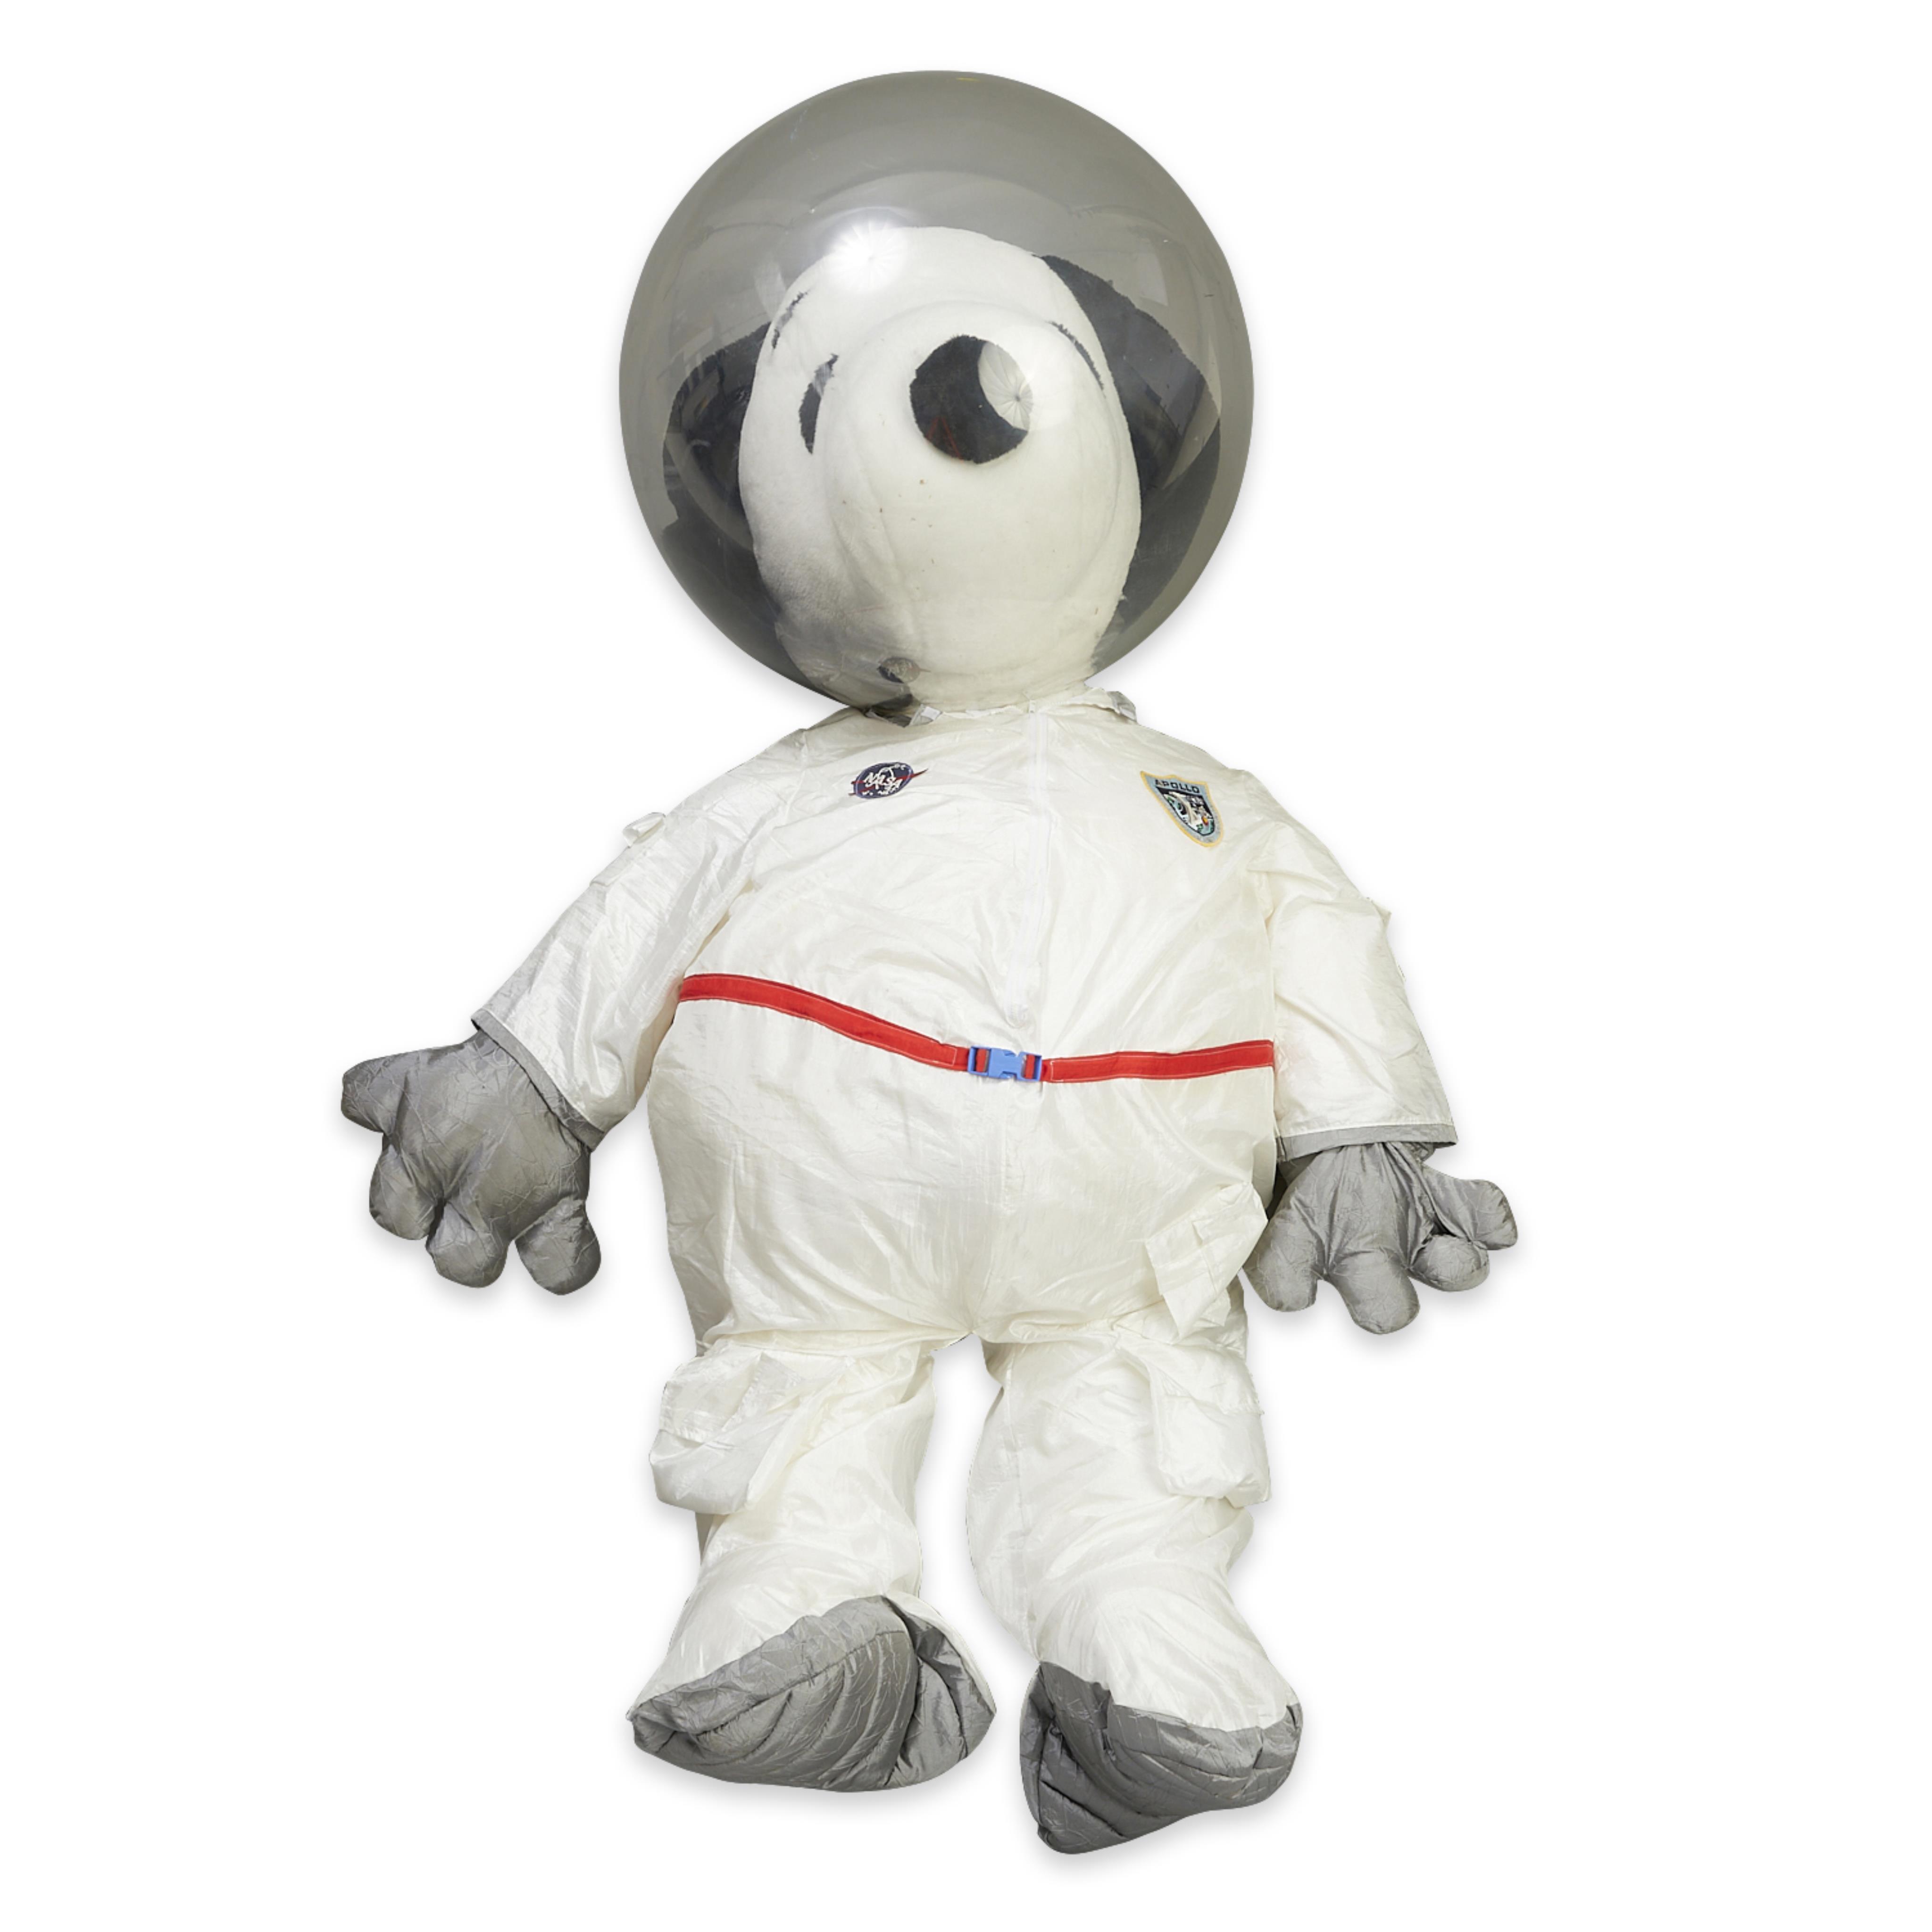 Very Large Stuffed Astronaut Snoopy Doll - Image 3 of 8